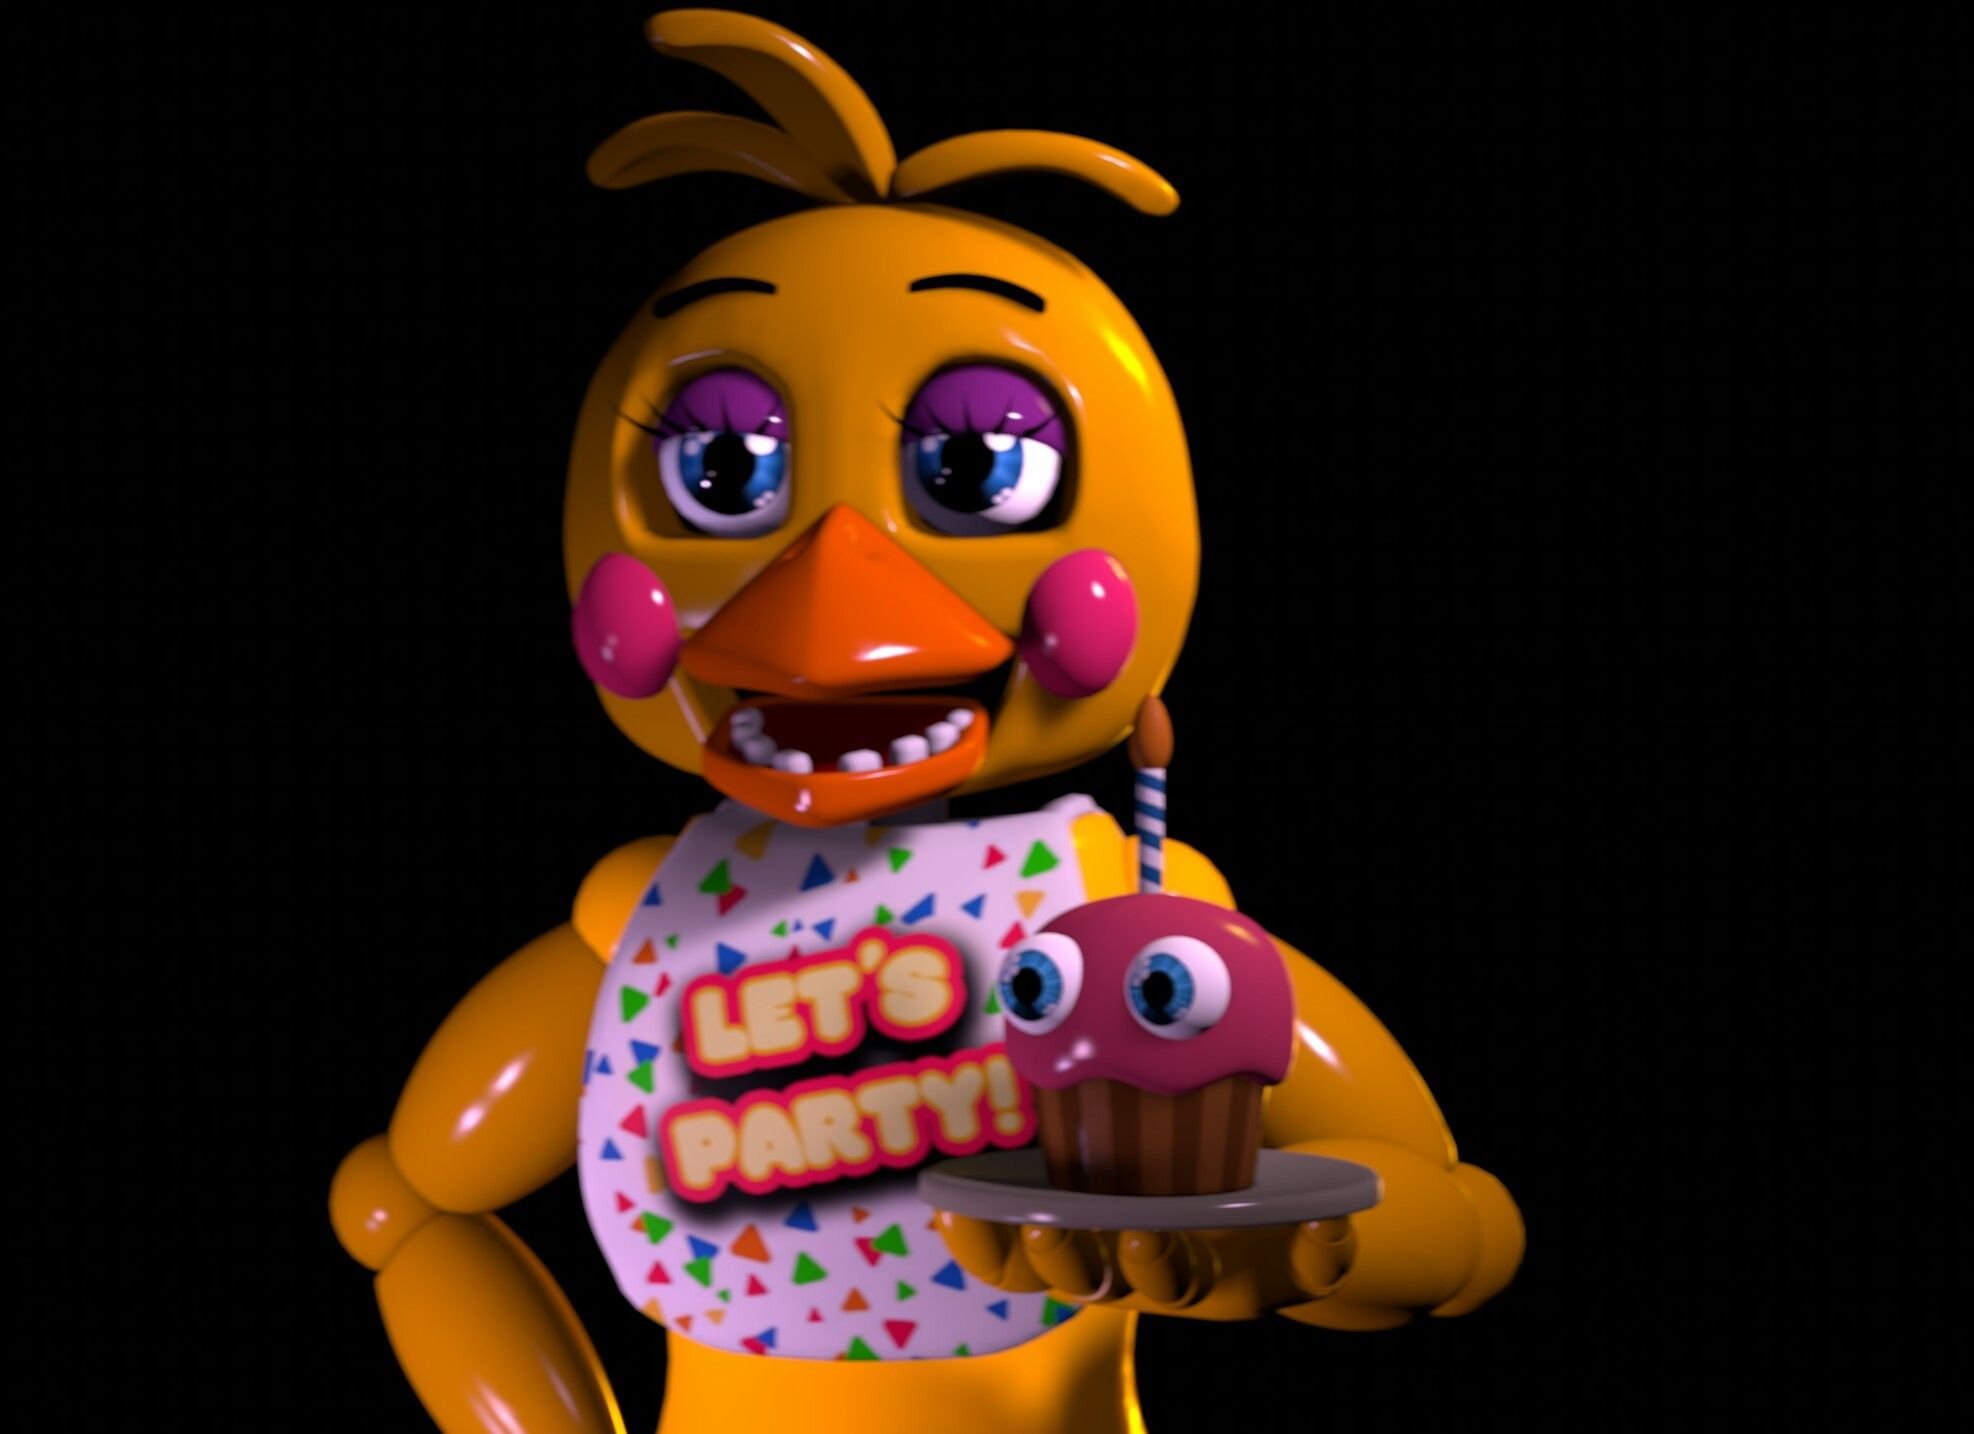 Freddy's chica. FNAF 1 чика. Five Nights at Freddy's чика. Чика ФНАФ 2. FNAF чика.